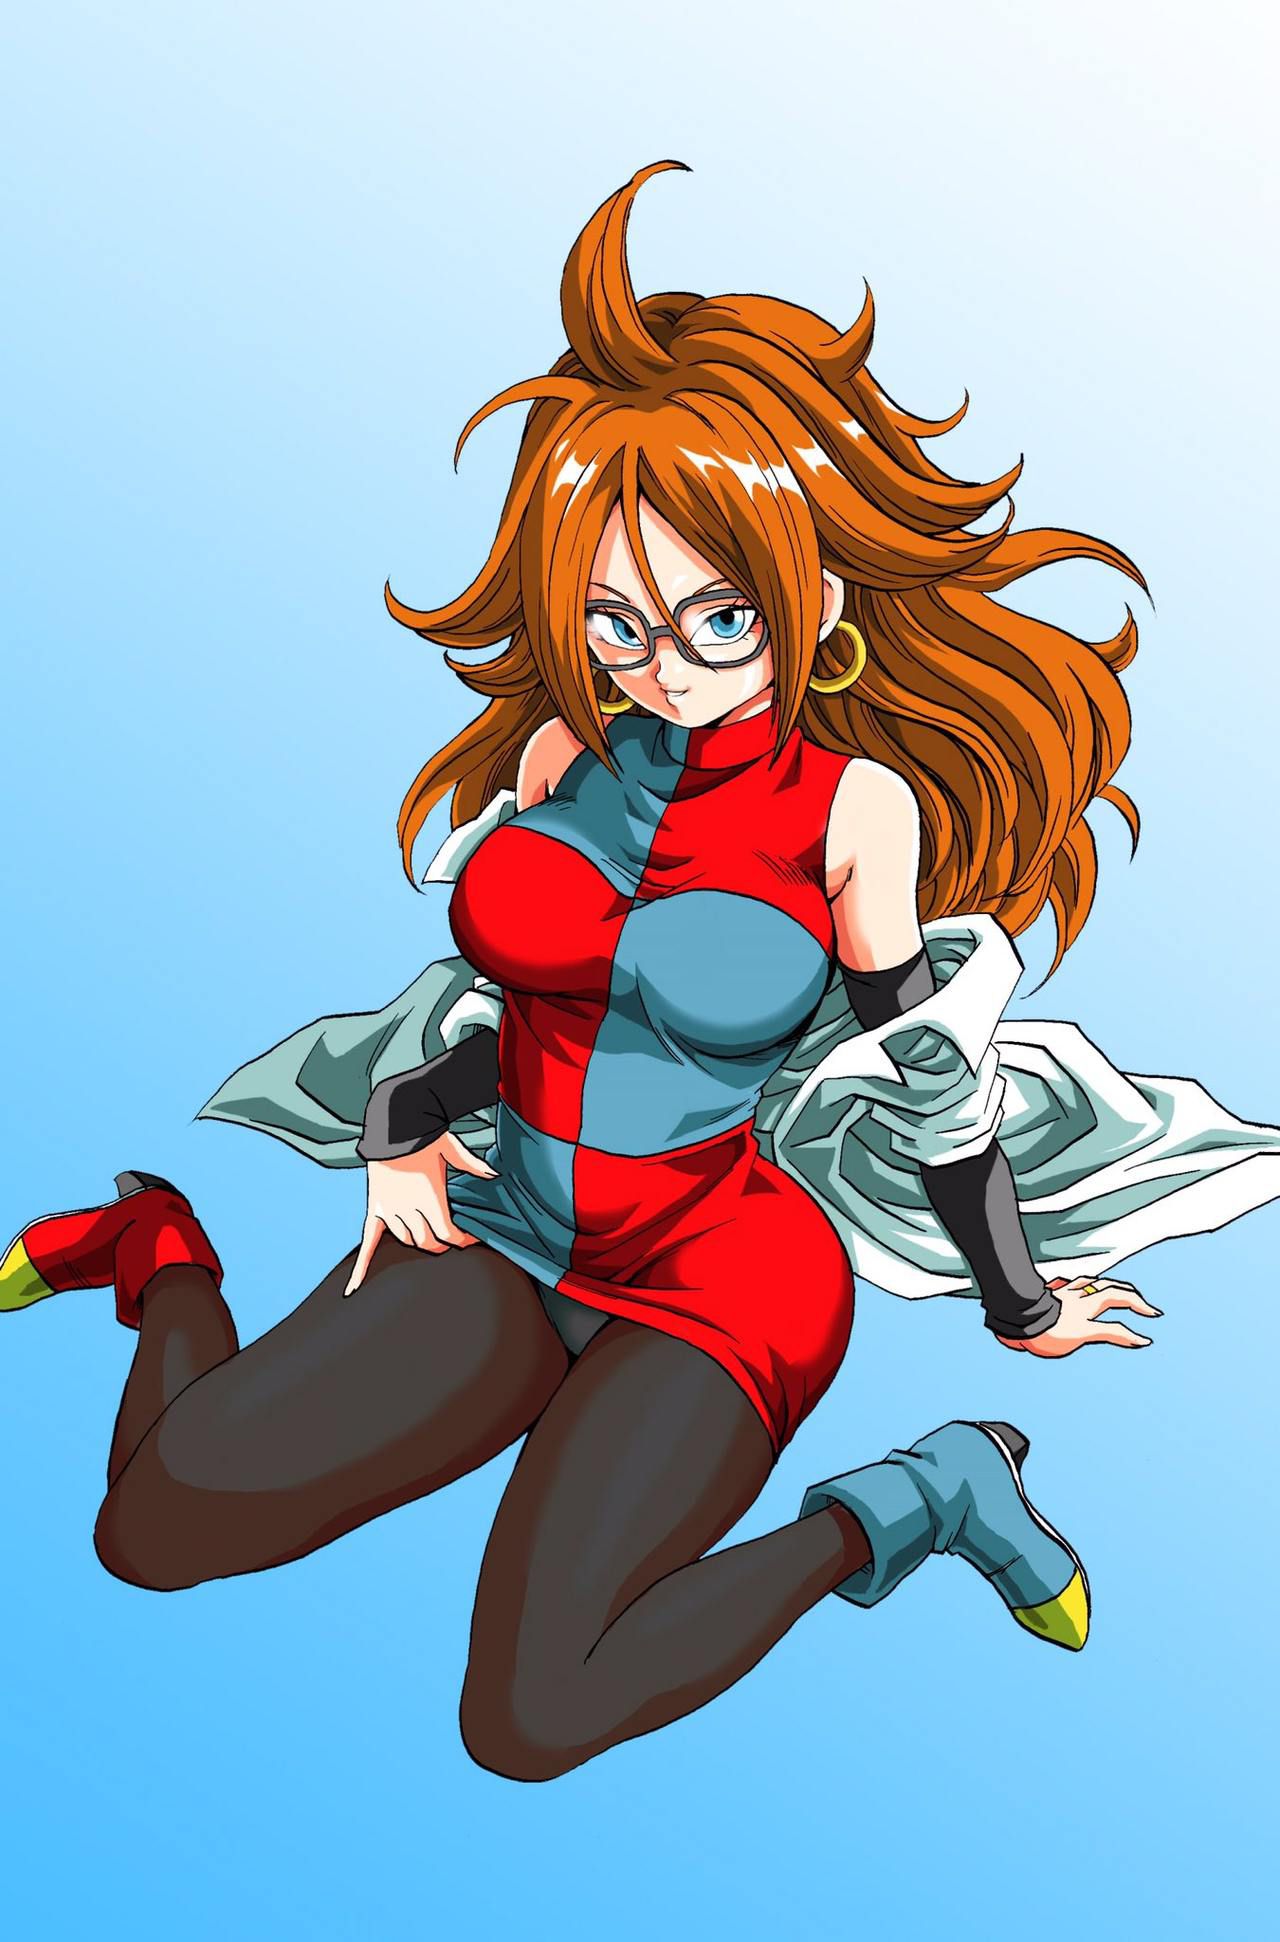 My Favorite Android 21 Pics 36